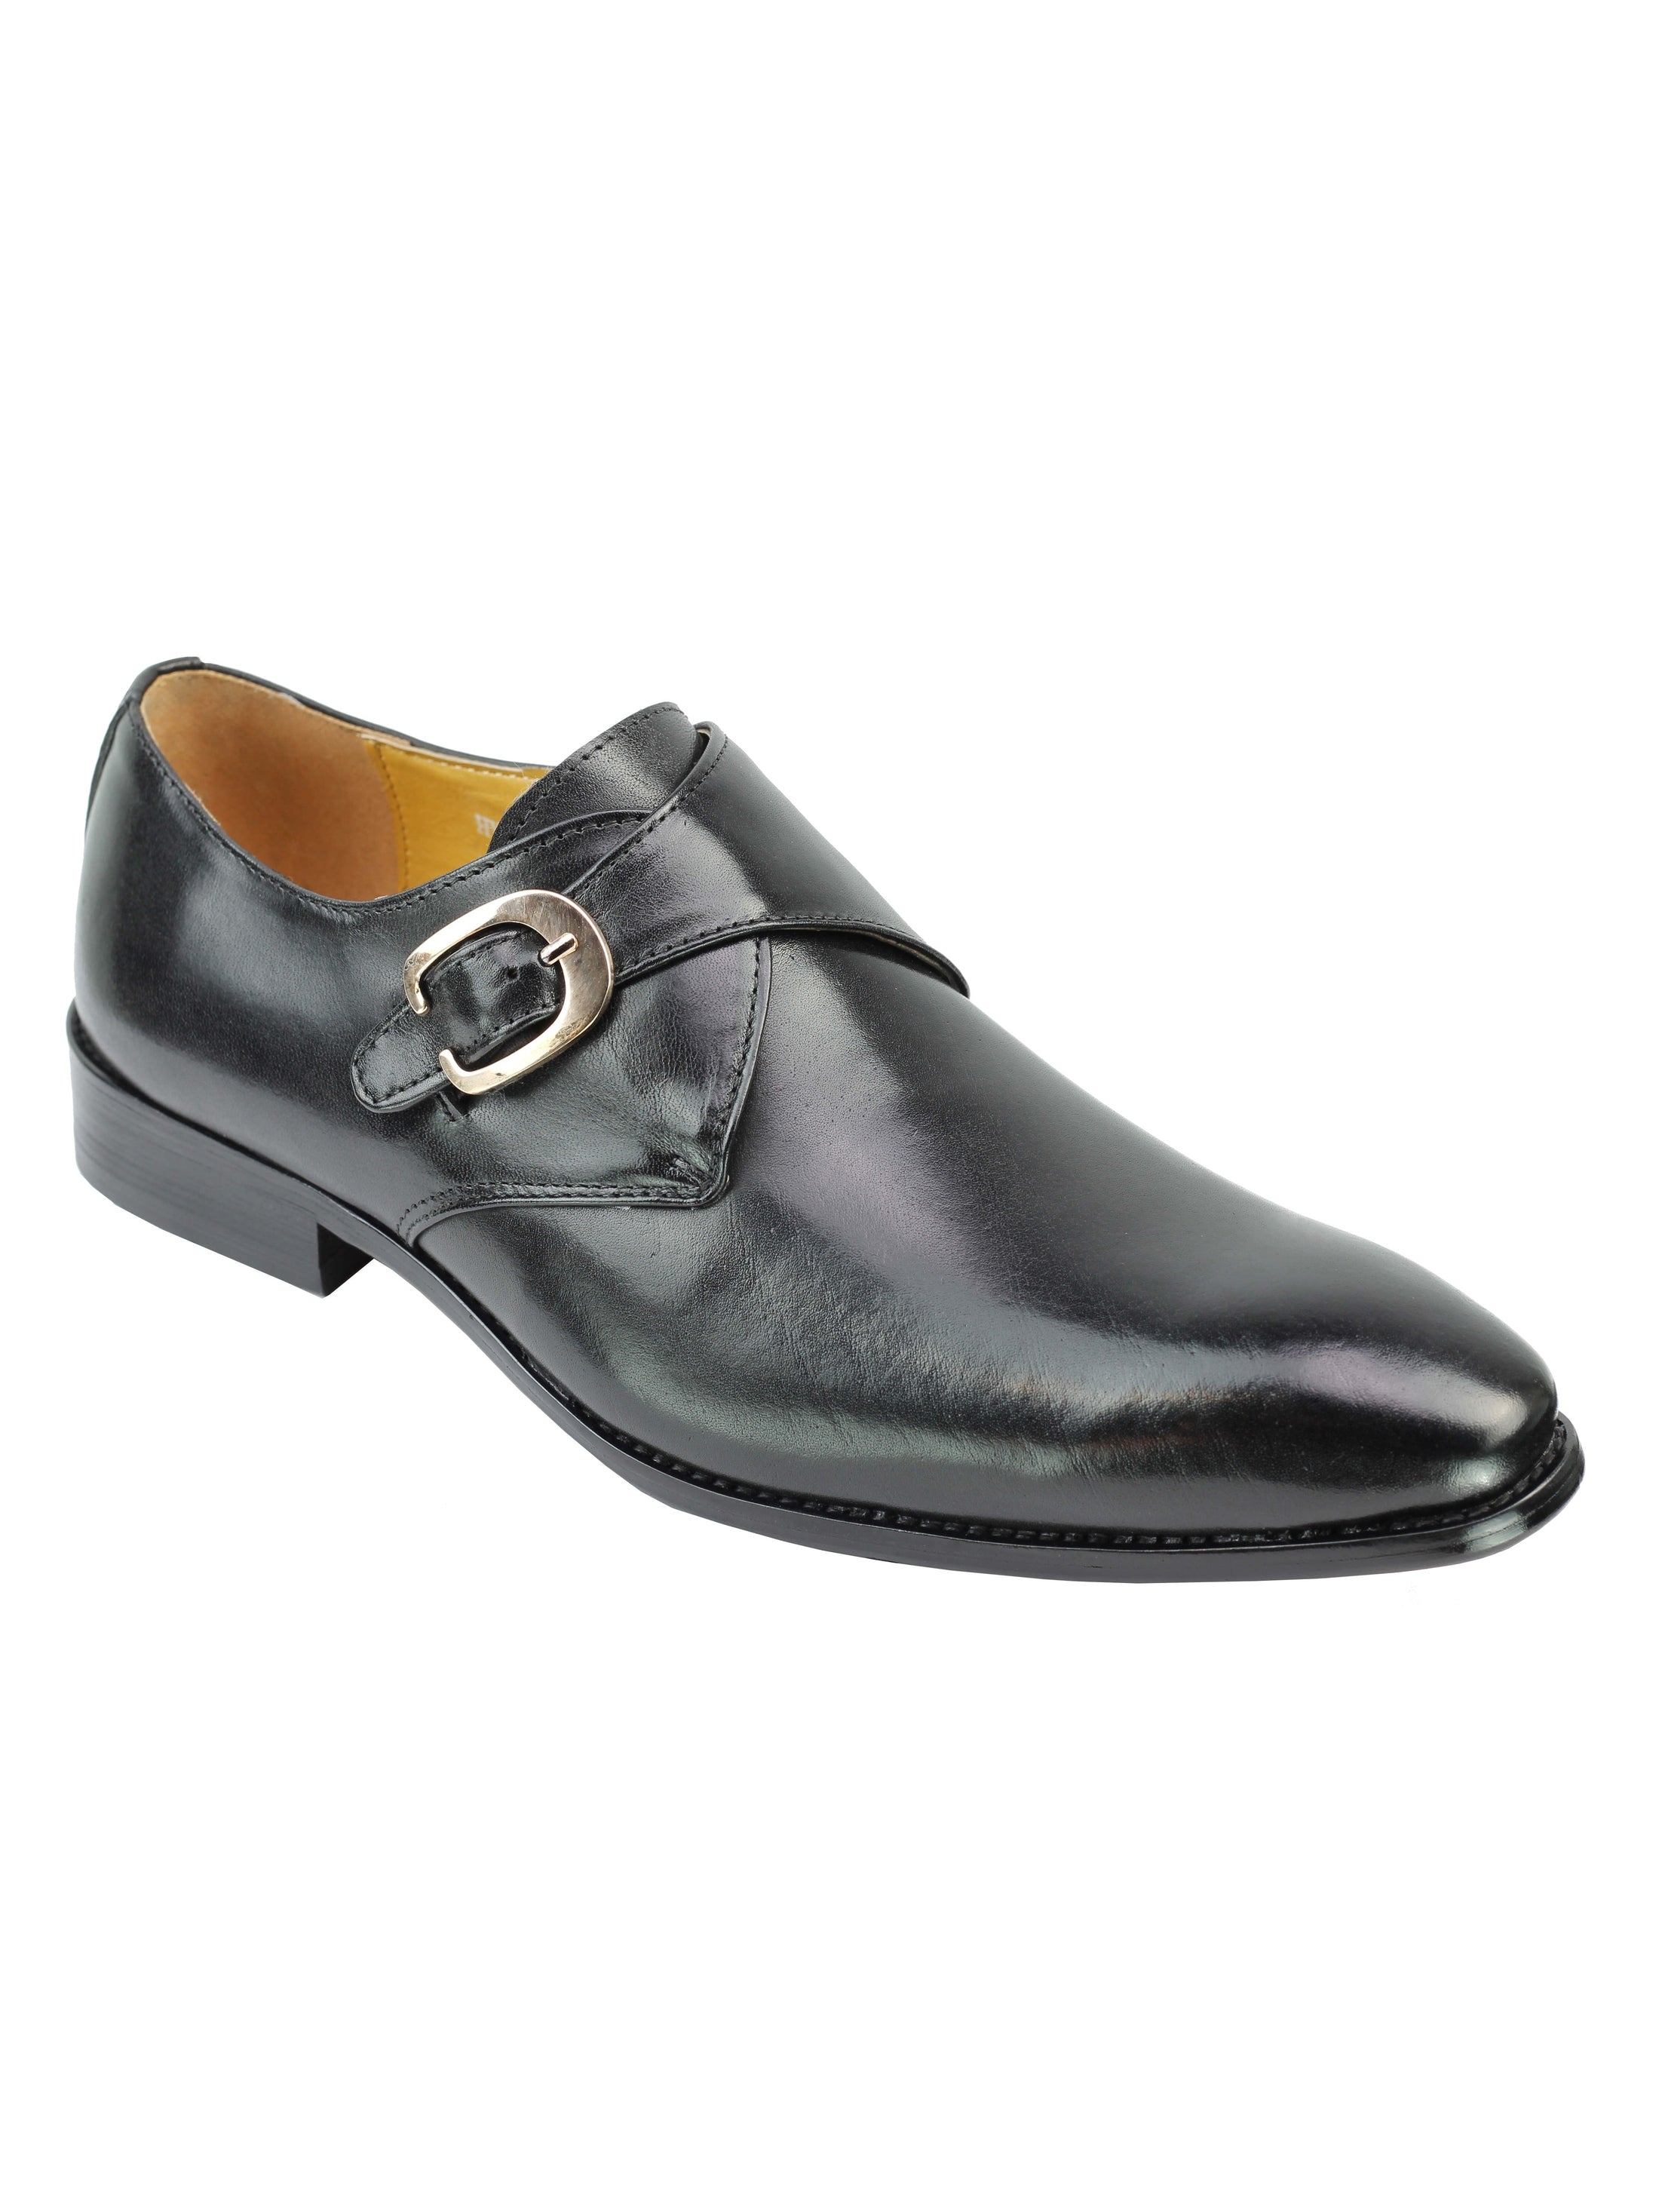 Black Monk Strap Real Leather Shoes